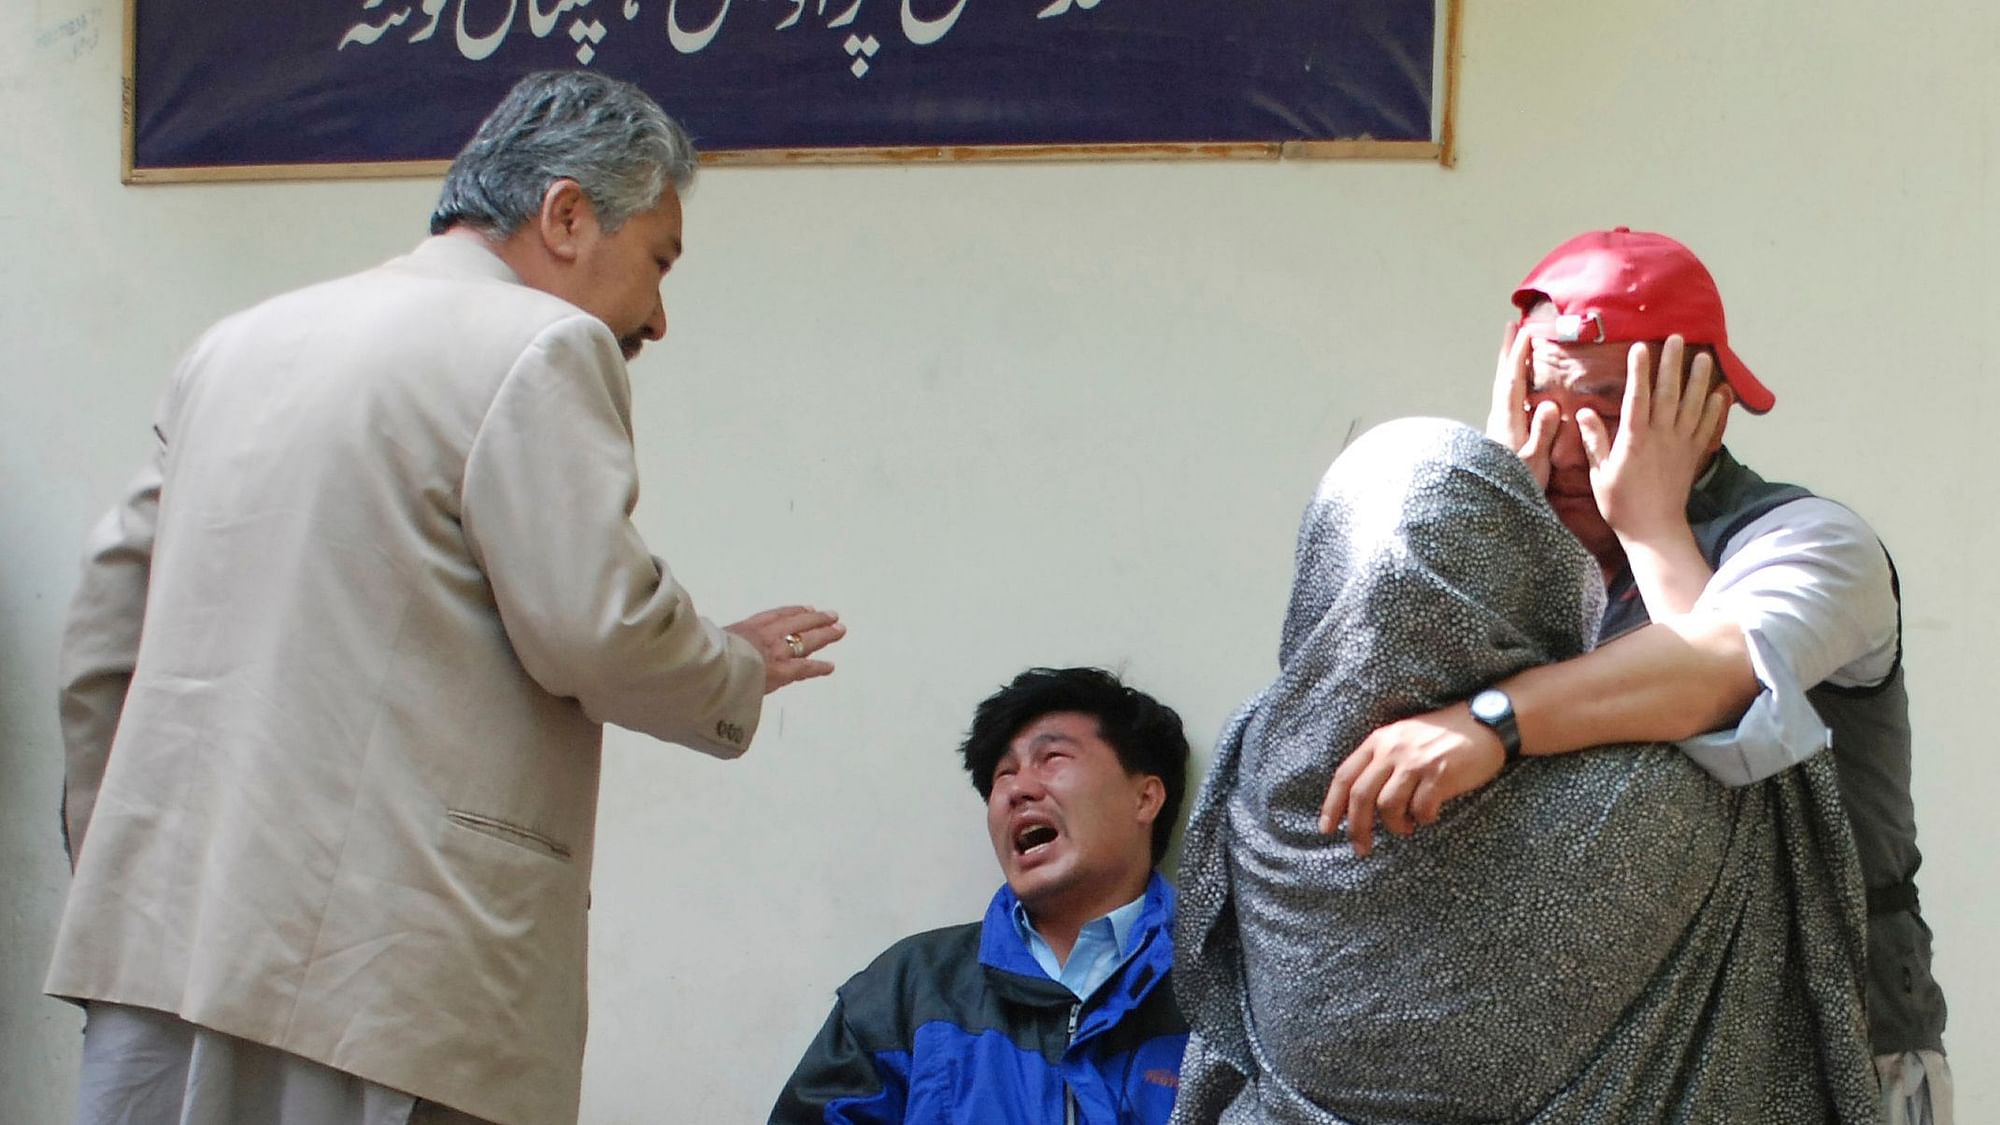 Family members of the blast victims comfort each other outside a mortuary in Pakistan’s Quetta on 12 April 2019.